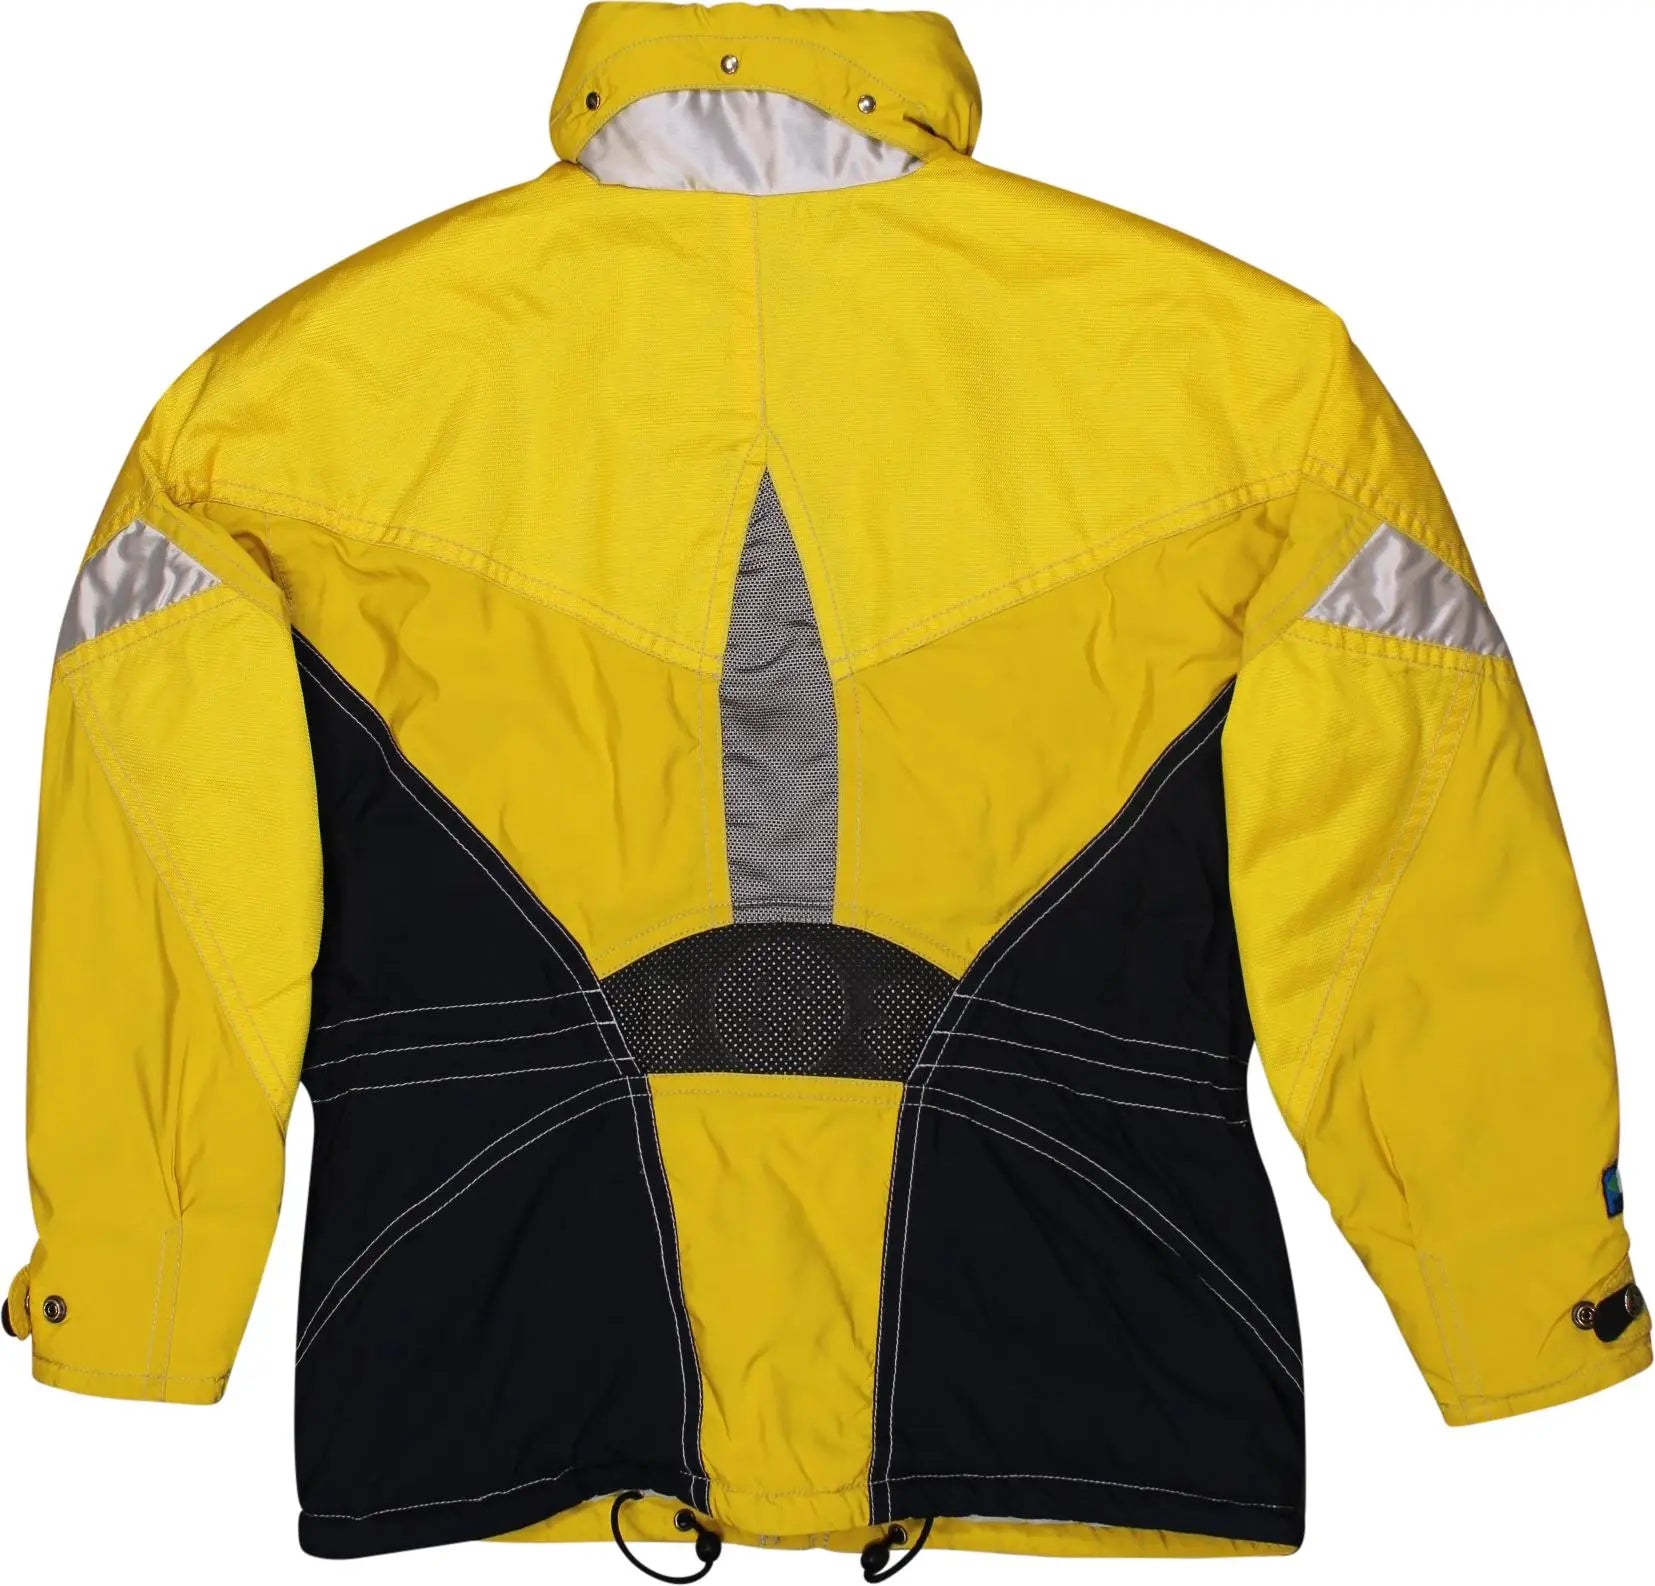 Colmar - Yellow Ski Coat by Colmar- ThriftTale.com - Vintage and second handclothing